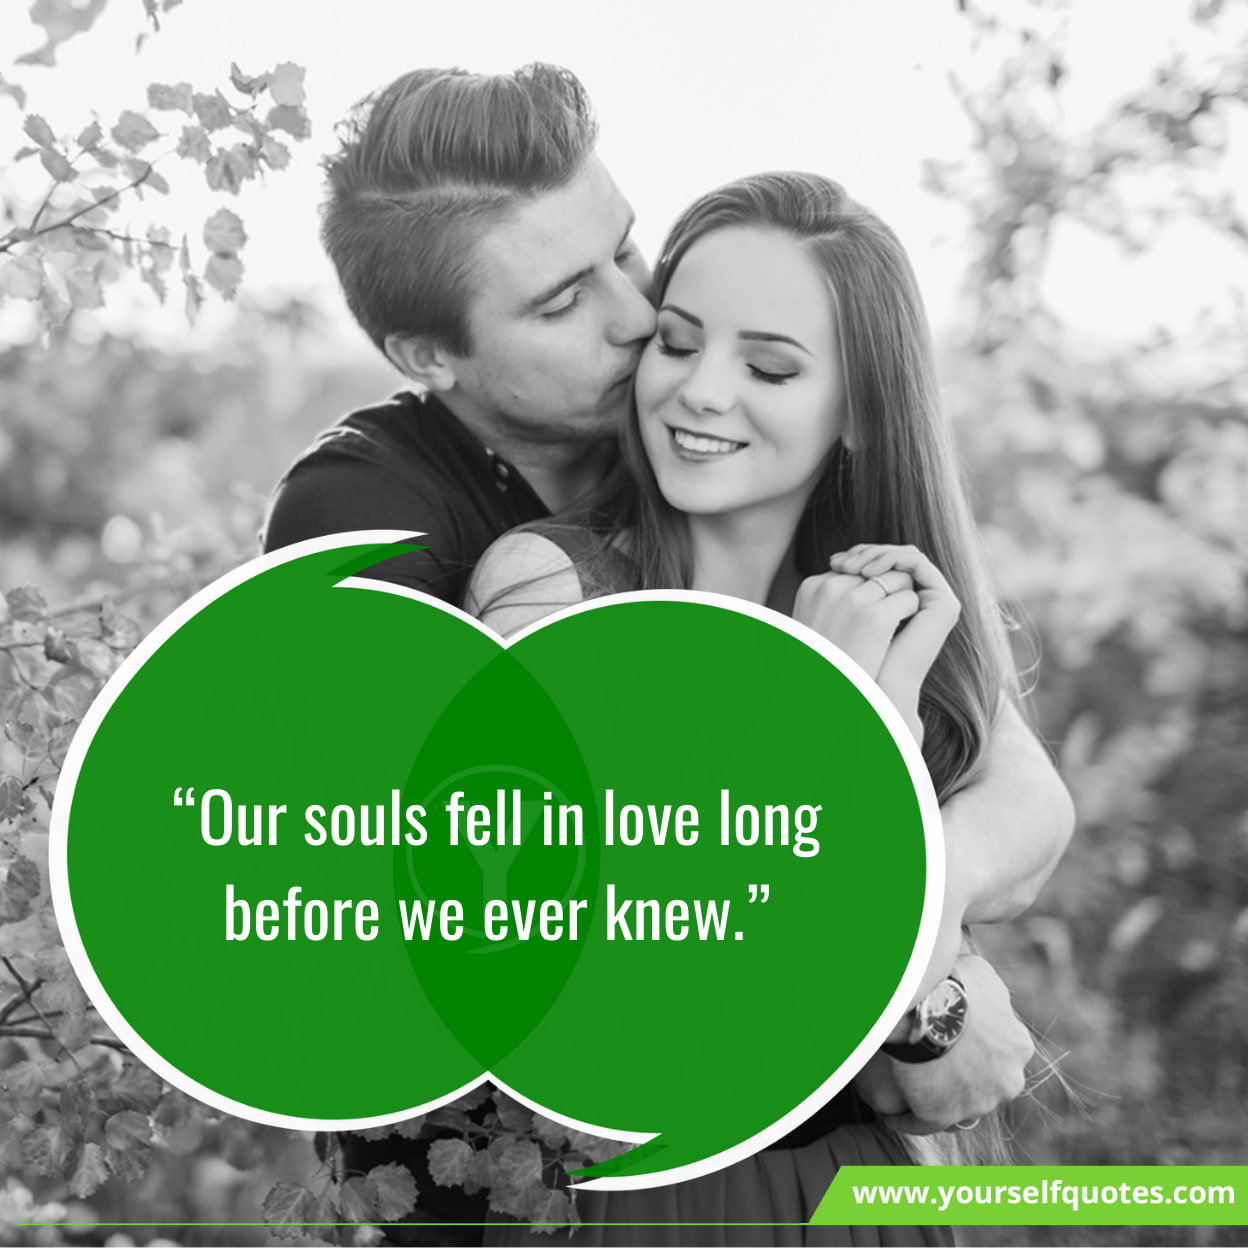 Inspiring Quotes For Girlfriend